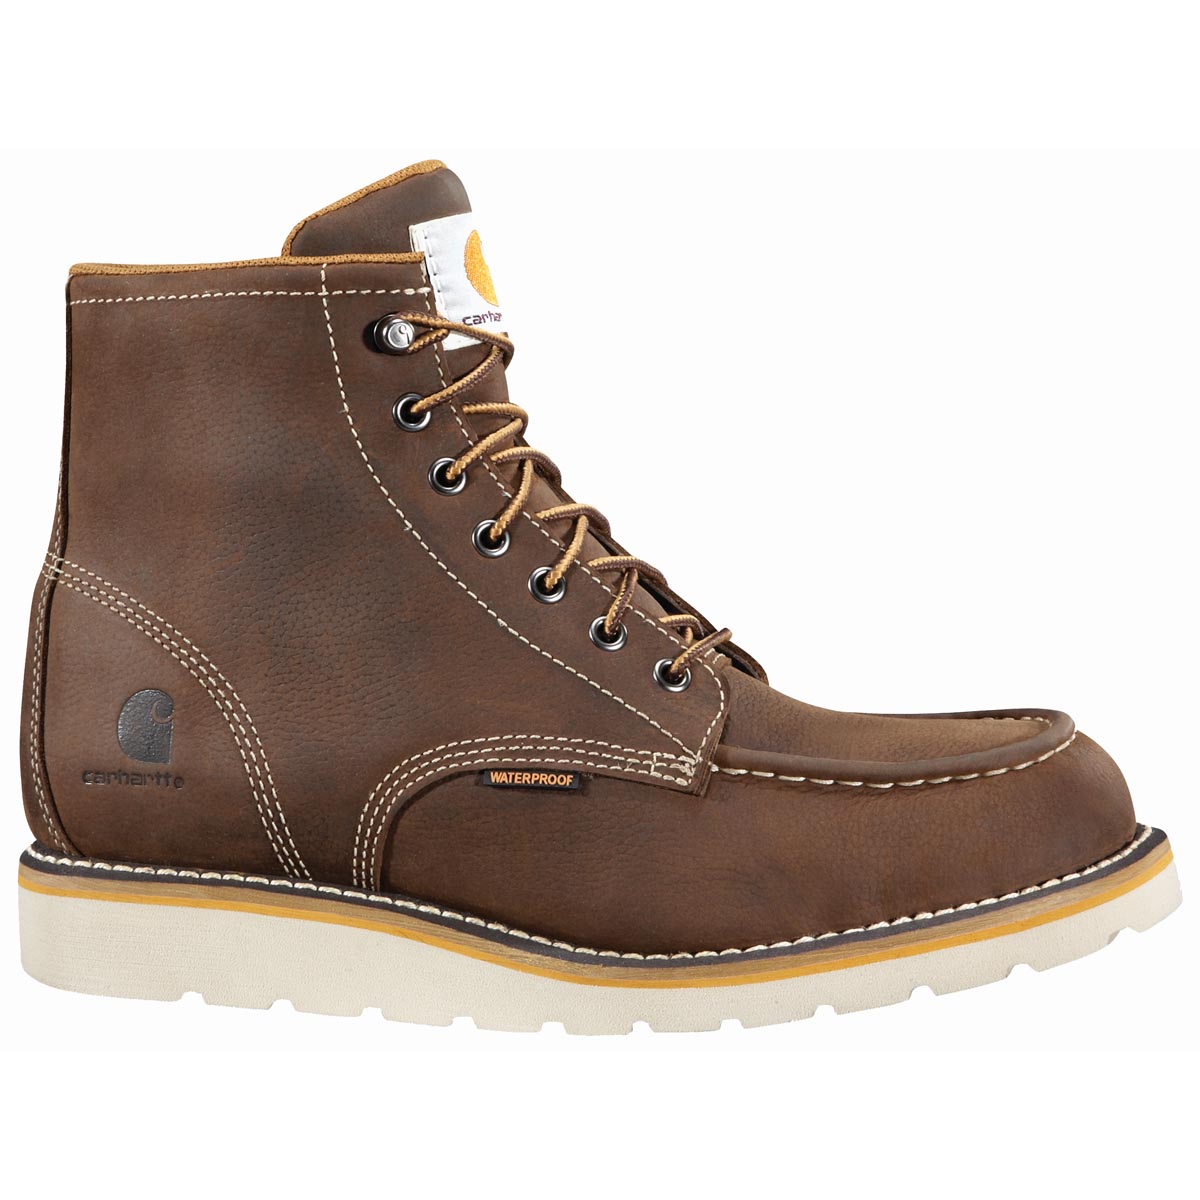 Carhartt Mens 6 Inch Brown Waterproof Wedge Boot Non Safety Toe